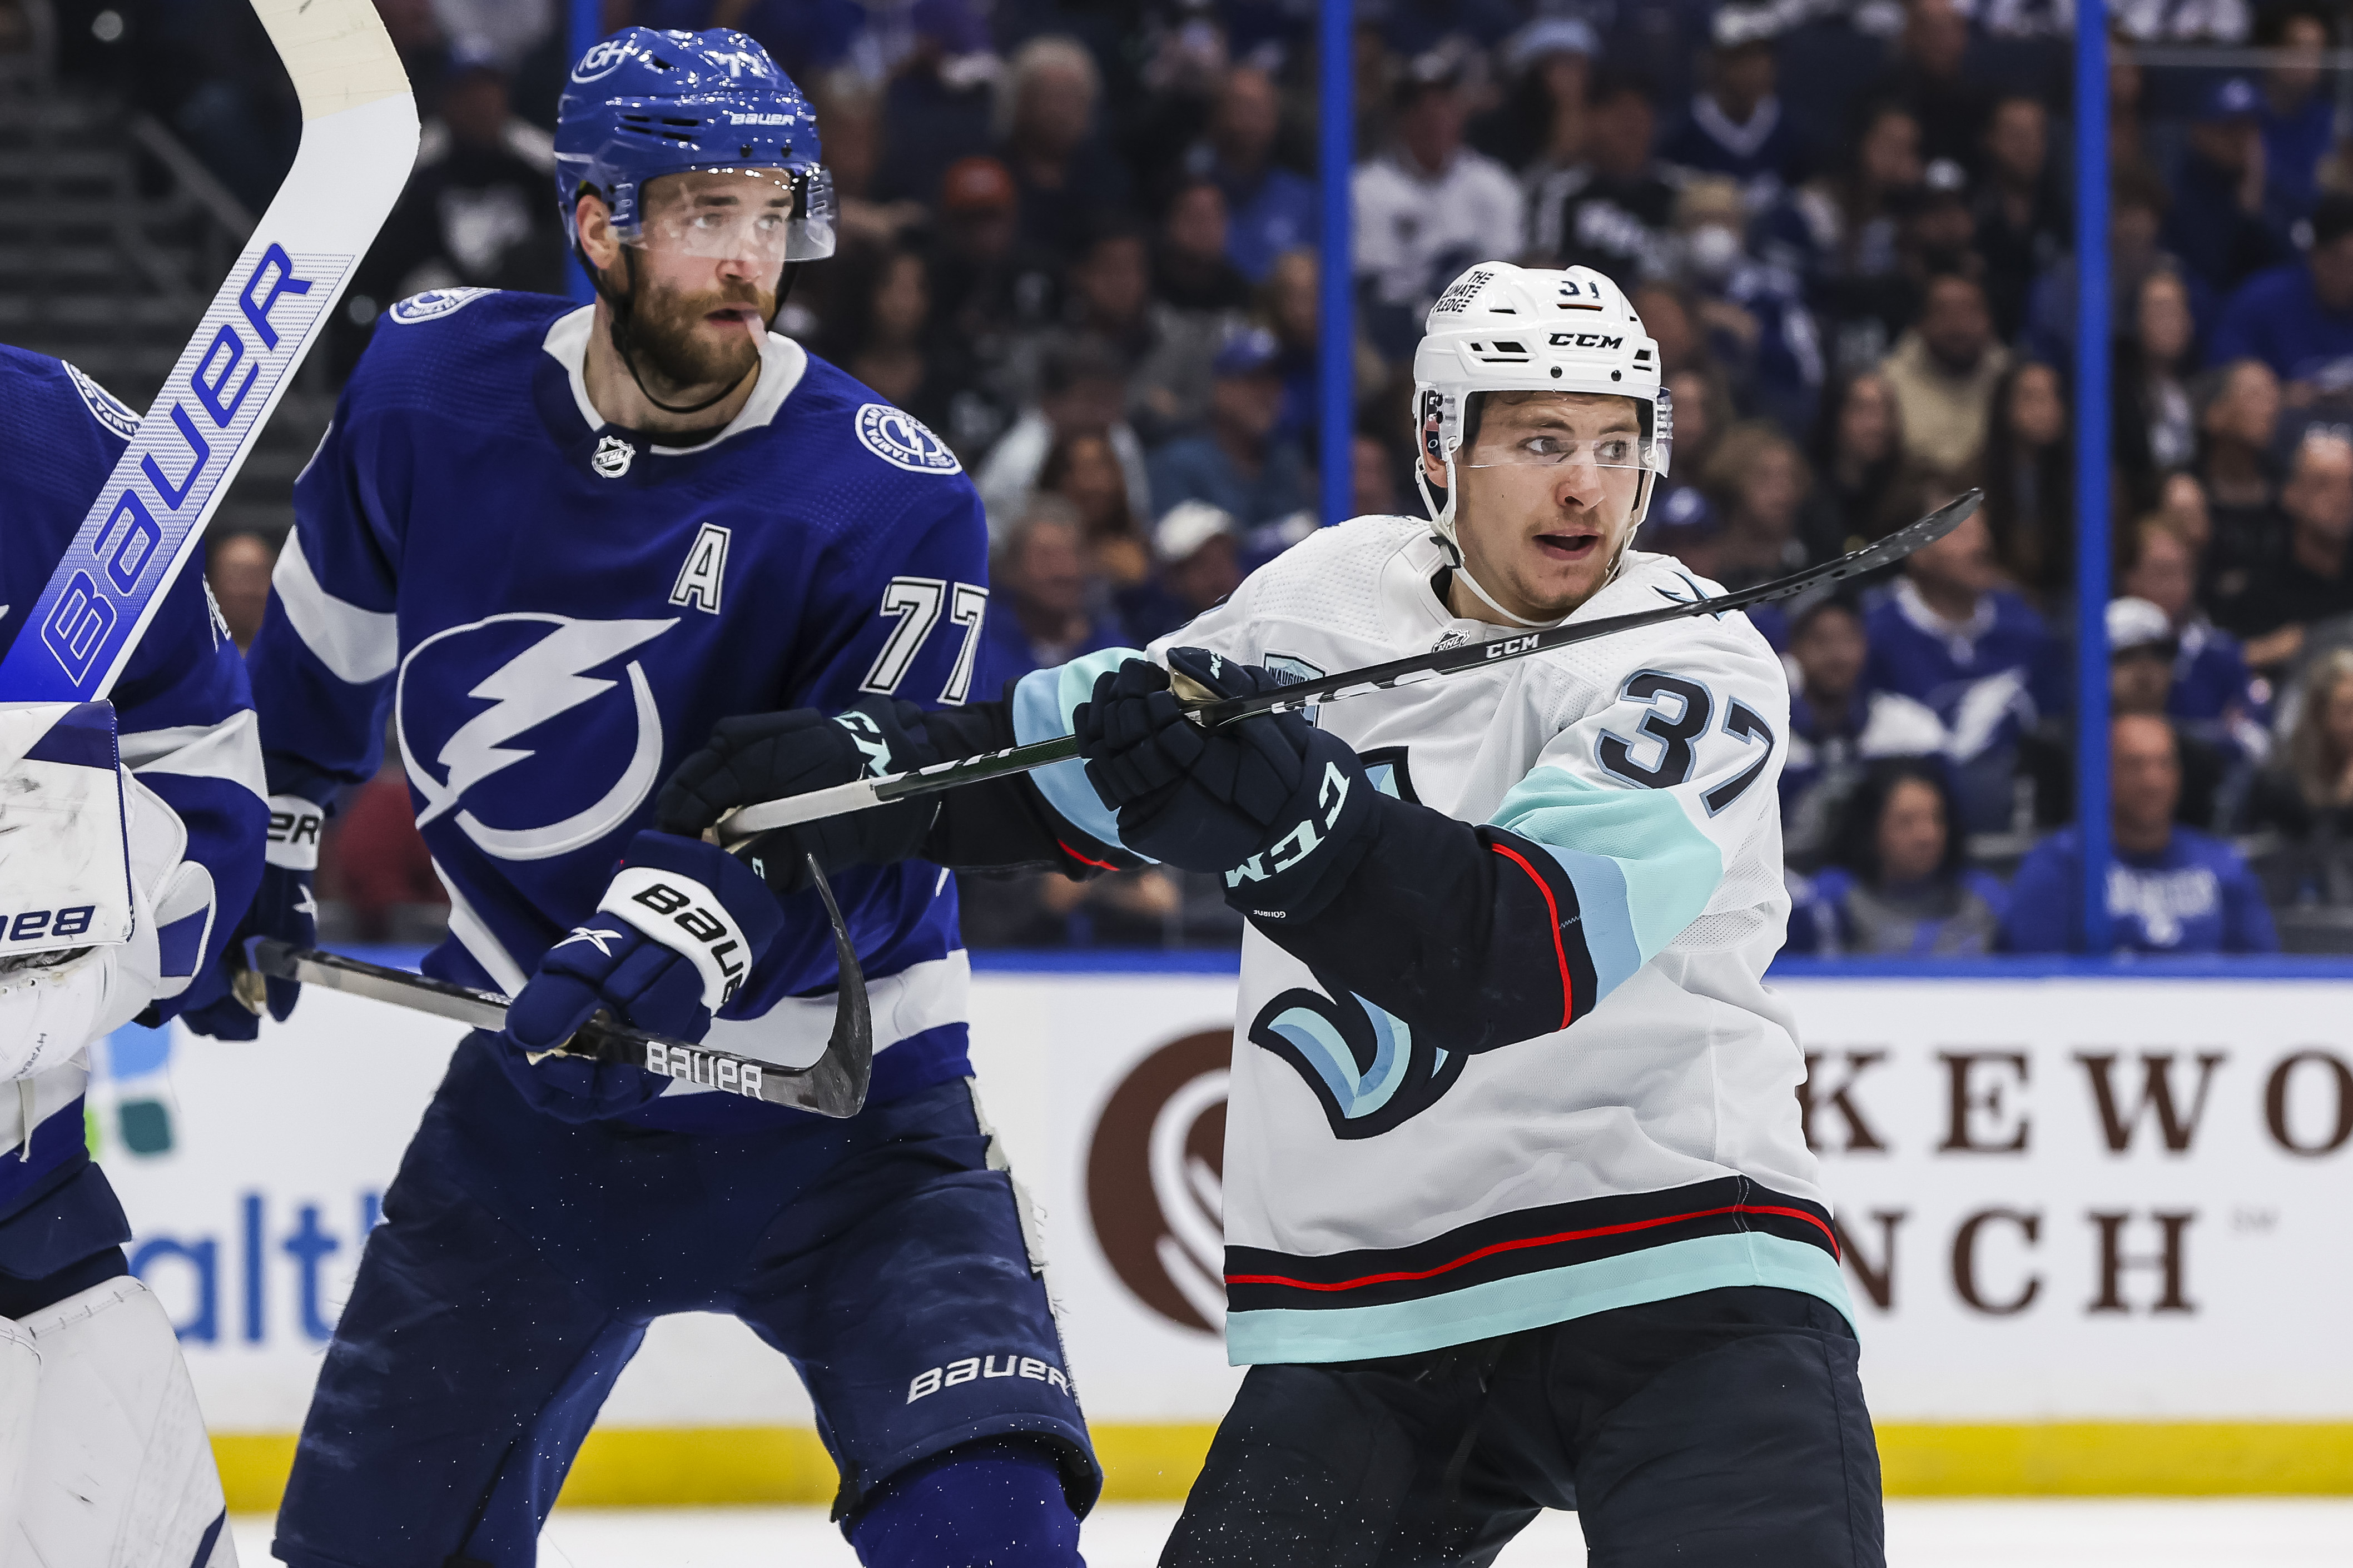 A mid-range shot of Victor Hedman (left) in a blue home jersey and Yanni Gourde (right) in a white away jersey. Both players are looking towards the right-hand frame of the shot.